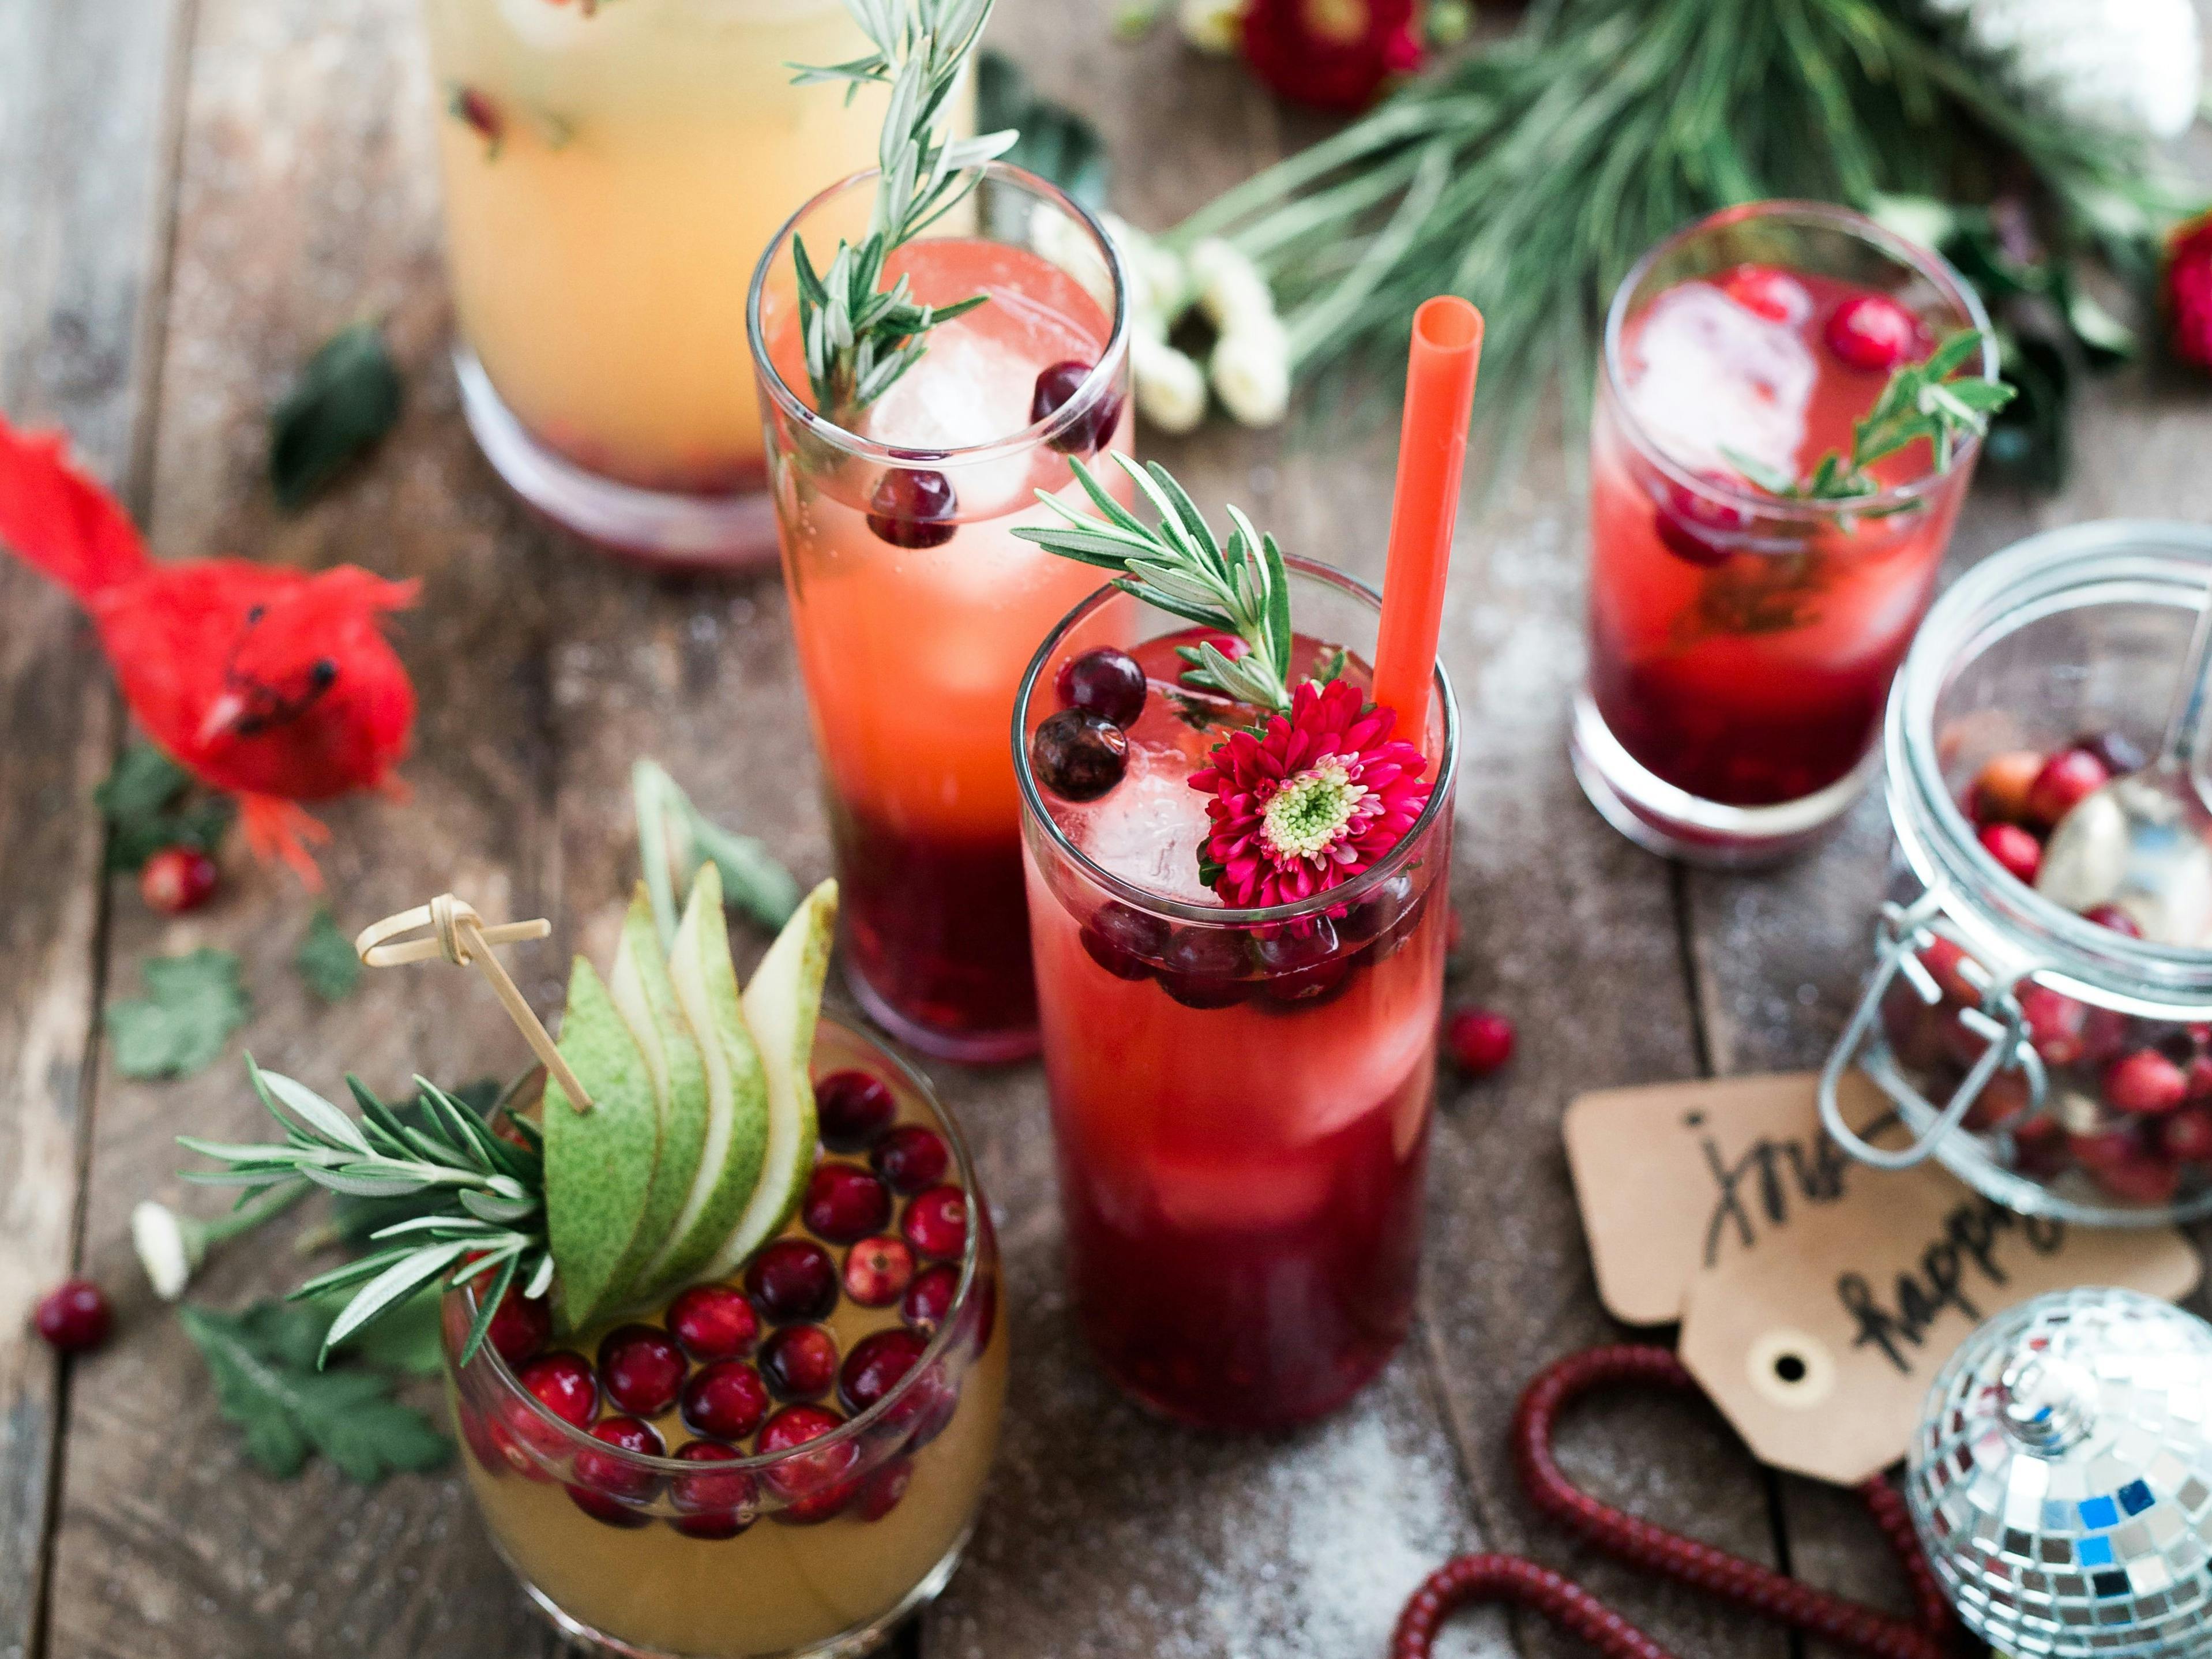 Close-up of festive, brightly colored drinks on a wooden table.